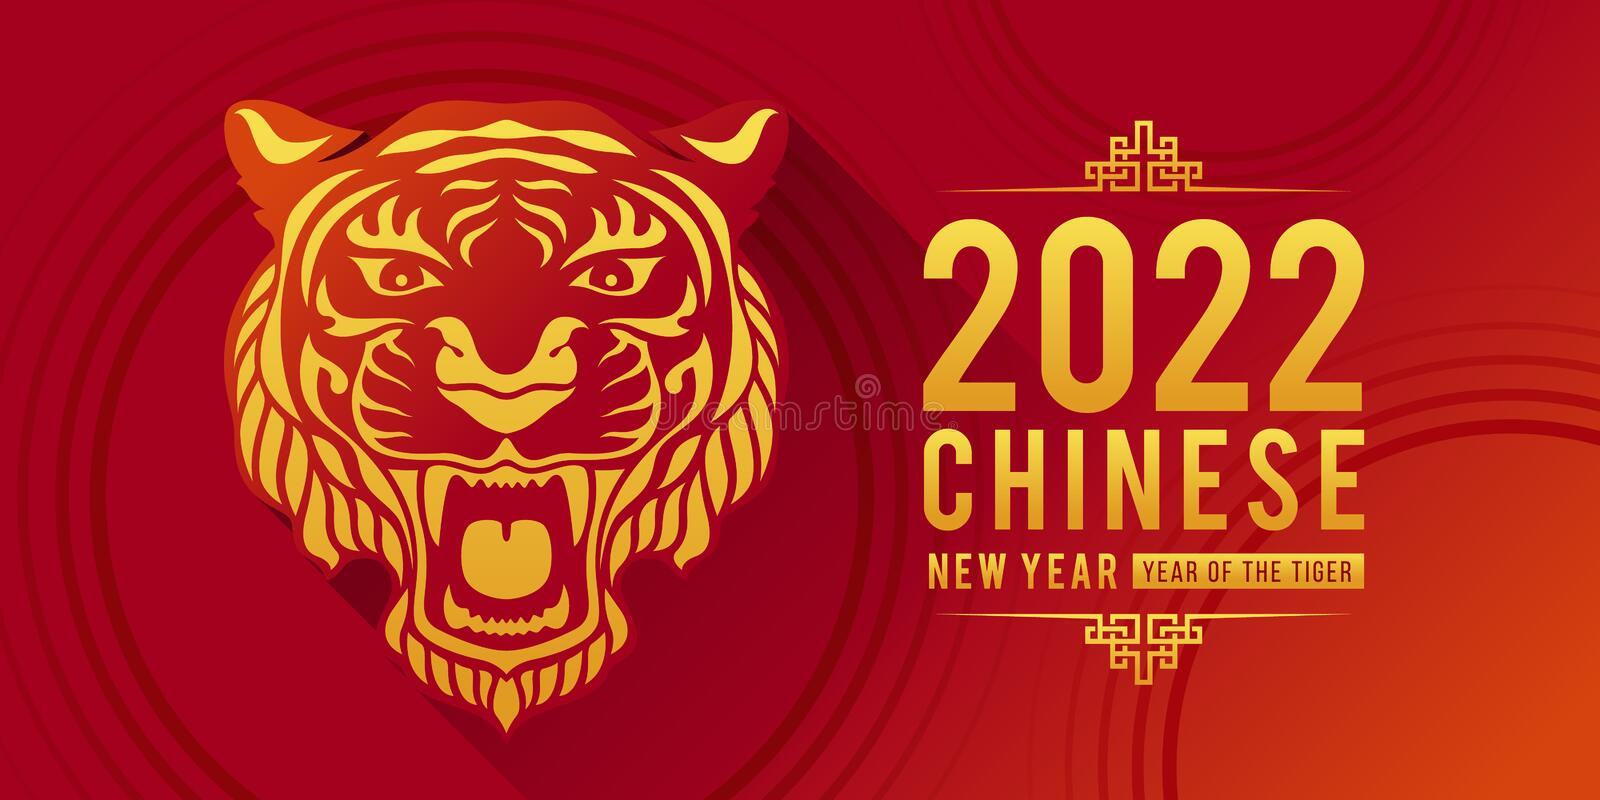 2022 Chinese New Year, Year Of The Tiger - Red Gold Head Tiger Zodiac-Calendar 2022 Chinese New Year